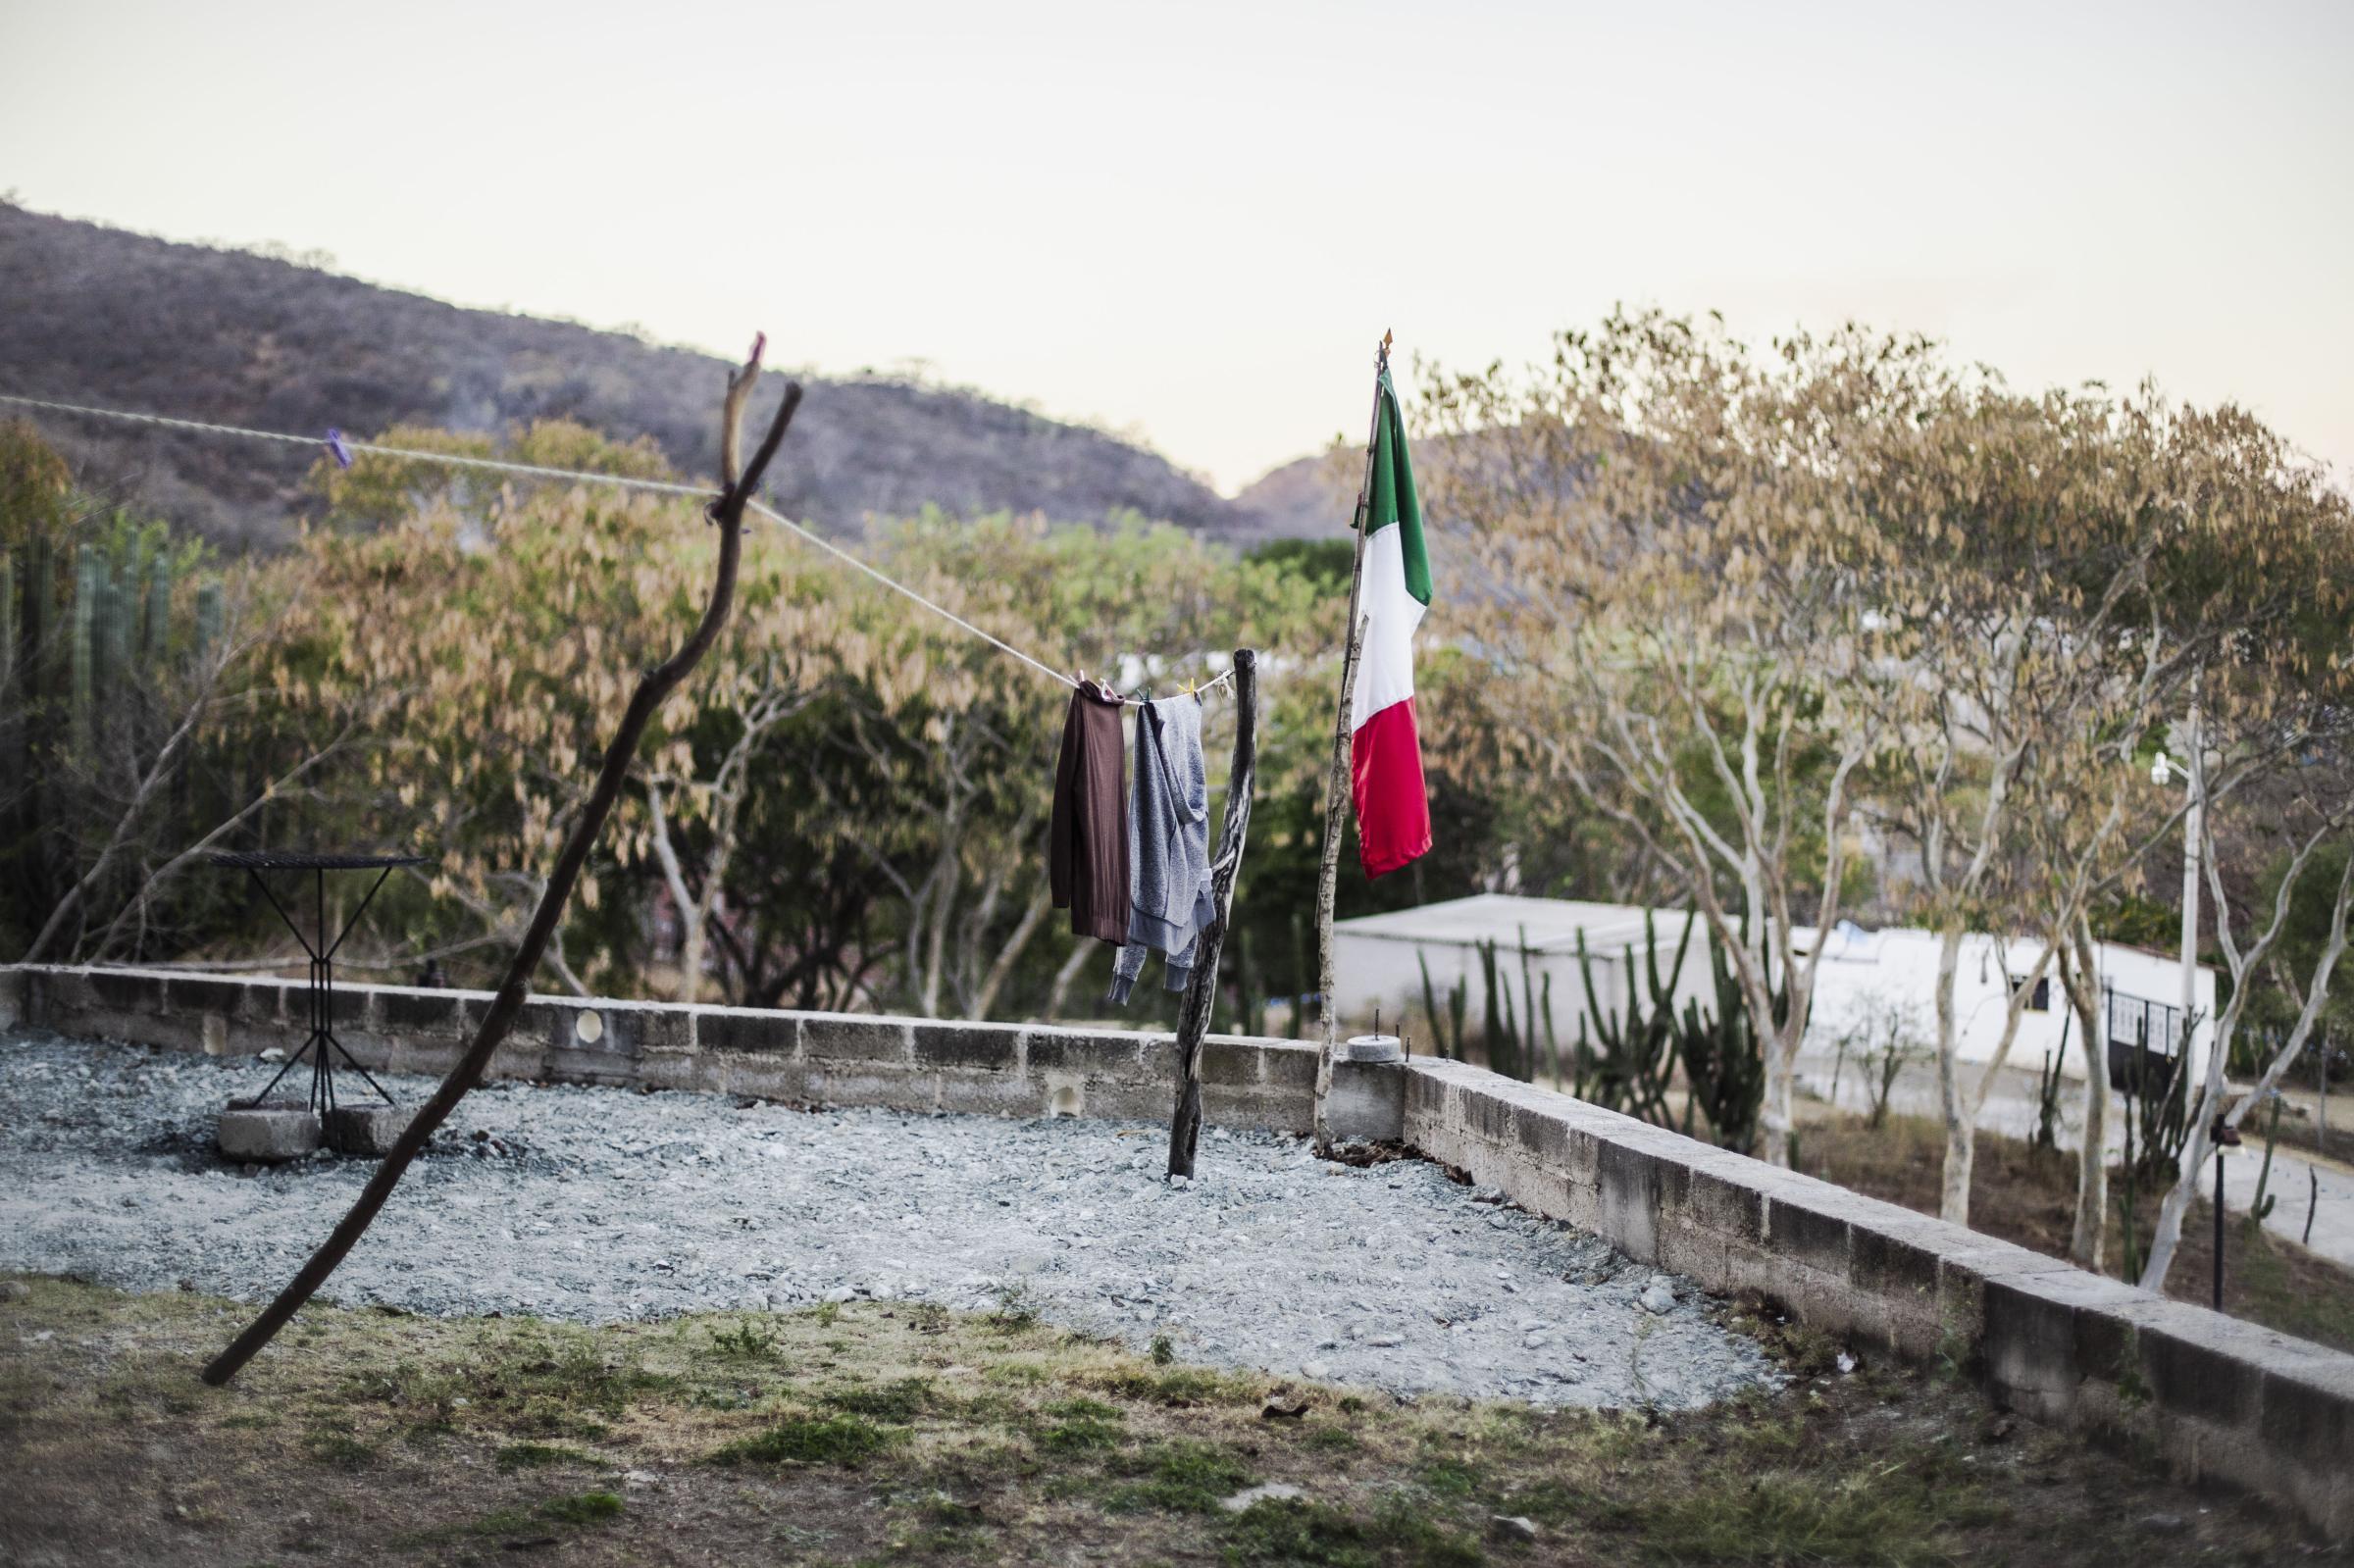 Bloomberg News - How a U.S. Remittance Windfall Saved Small Towns in Mexico